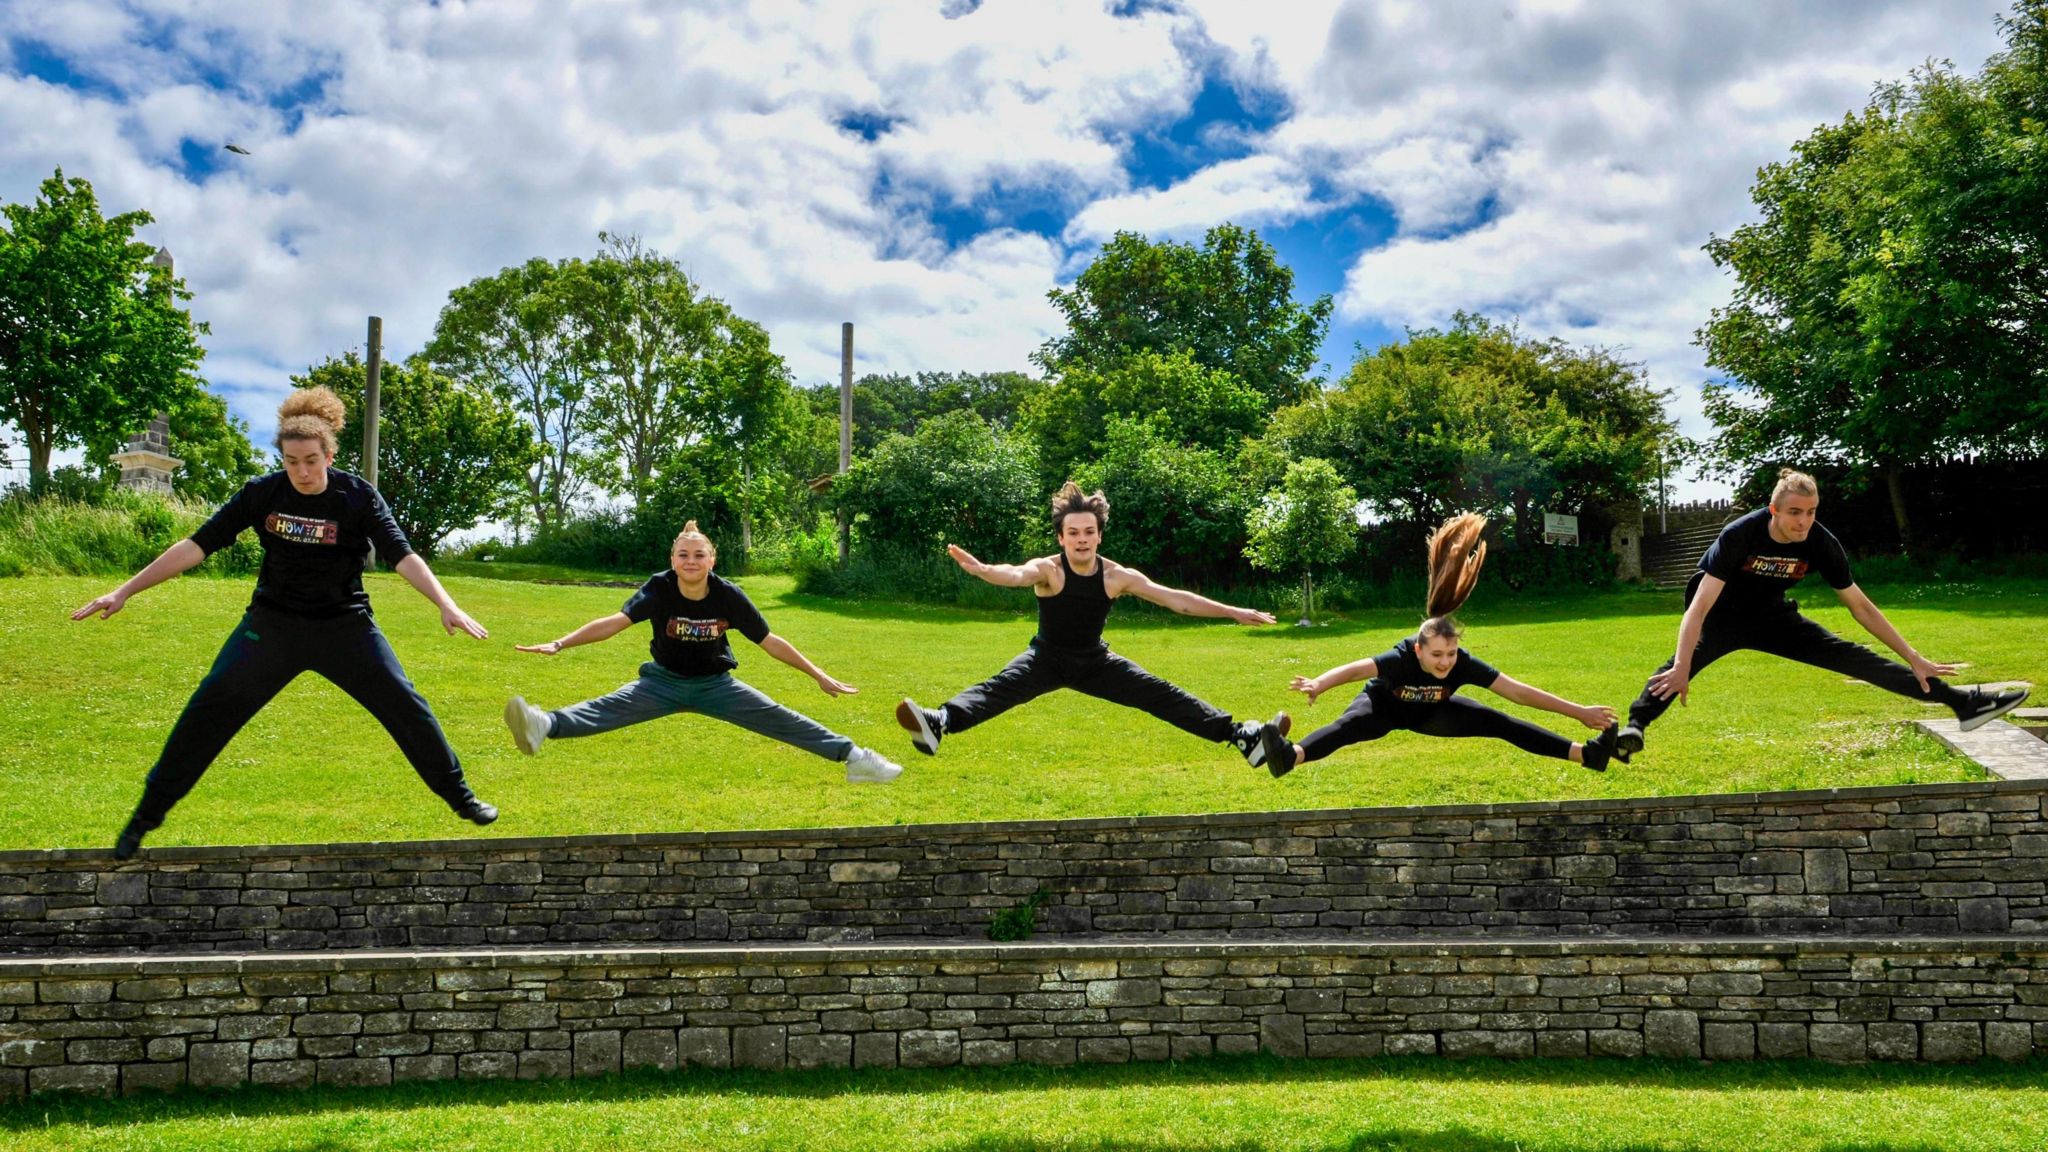 TUESDAY - Five young people wearing black tshirts jump out from being a stone wall in Swanage